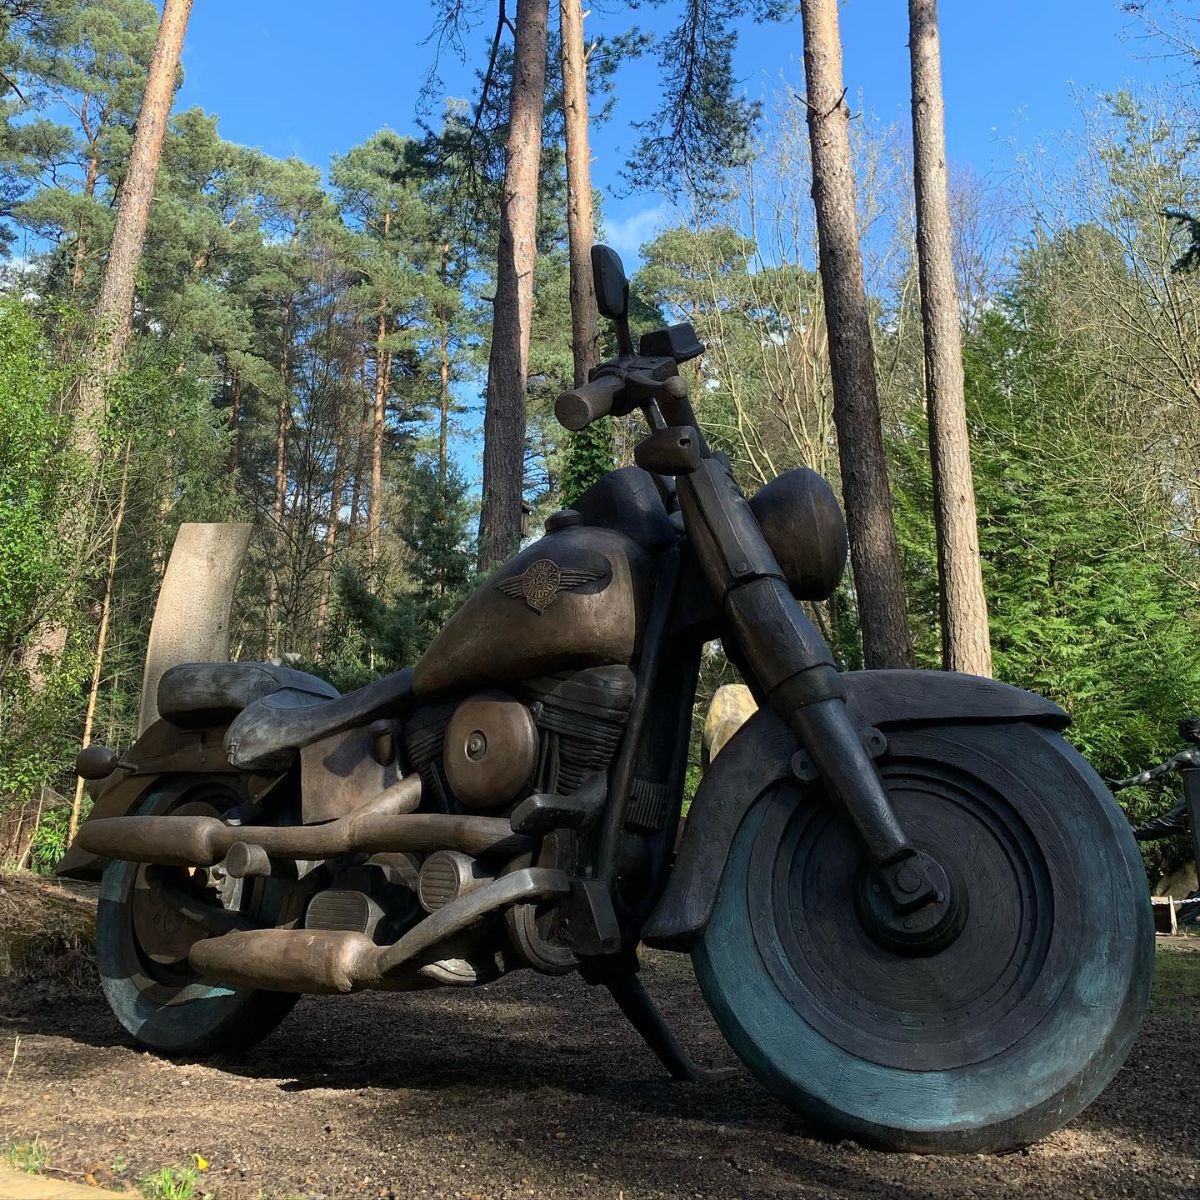 Introducing 'Freedom' by Steve Wood and Clive Morris. Monumental Harley-Davidson at the sculpture park